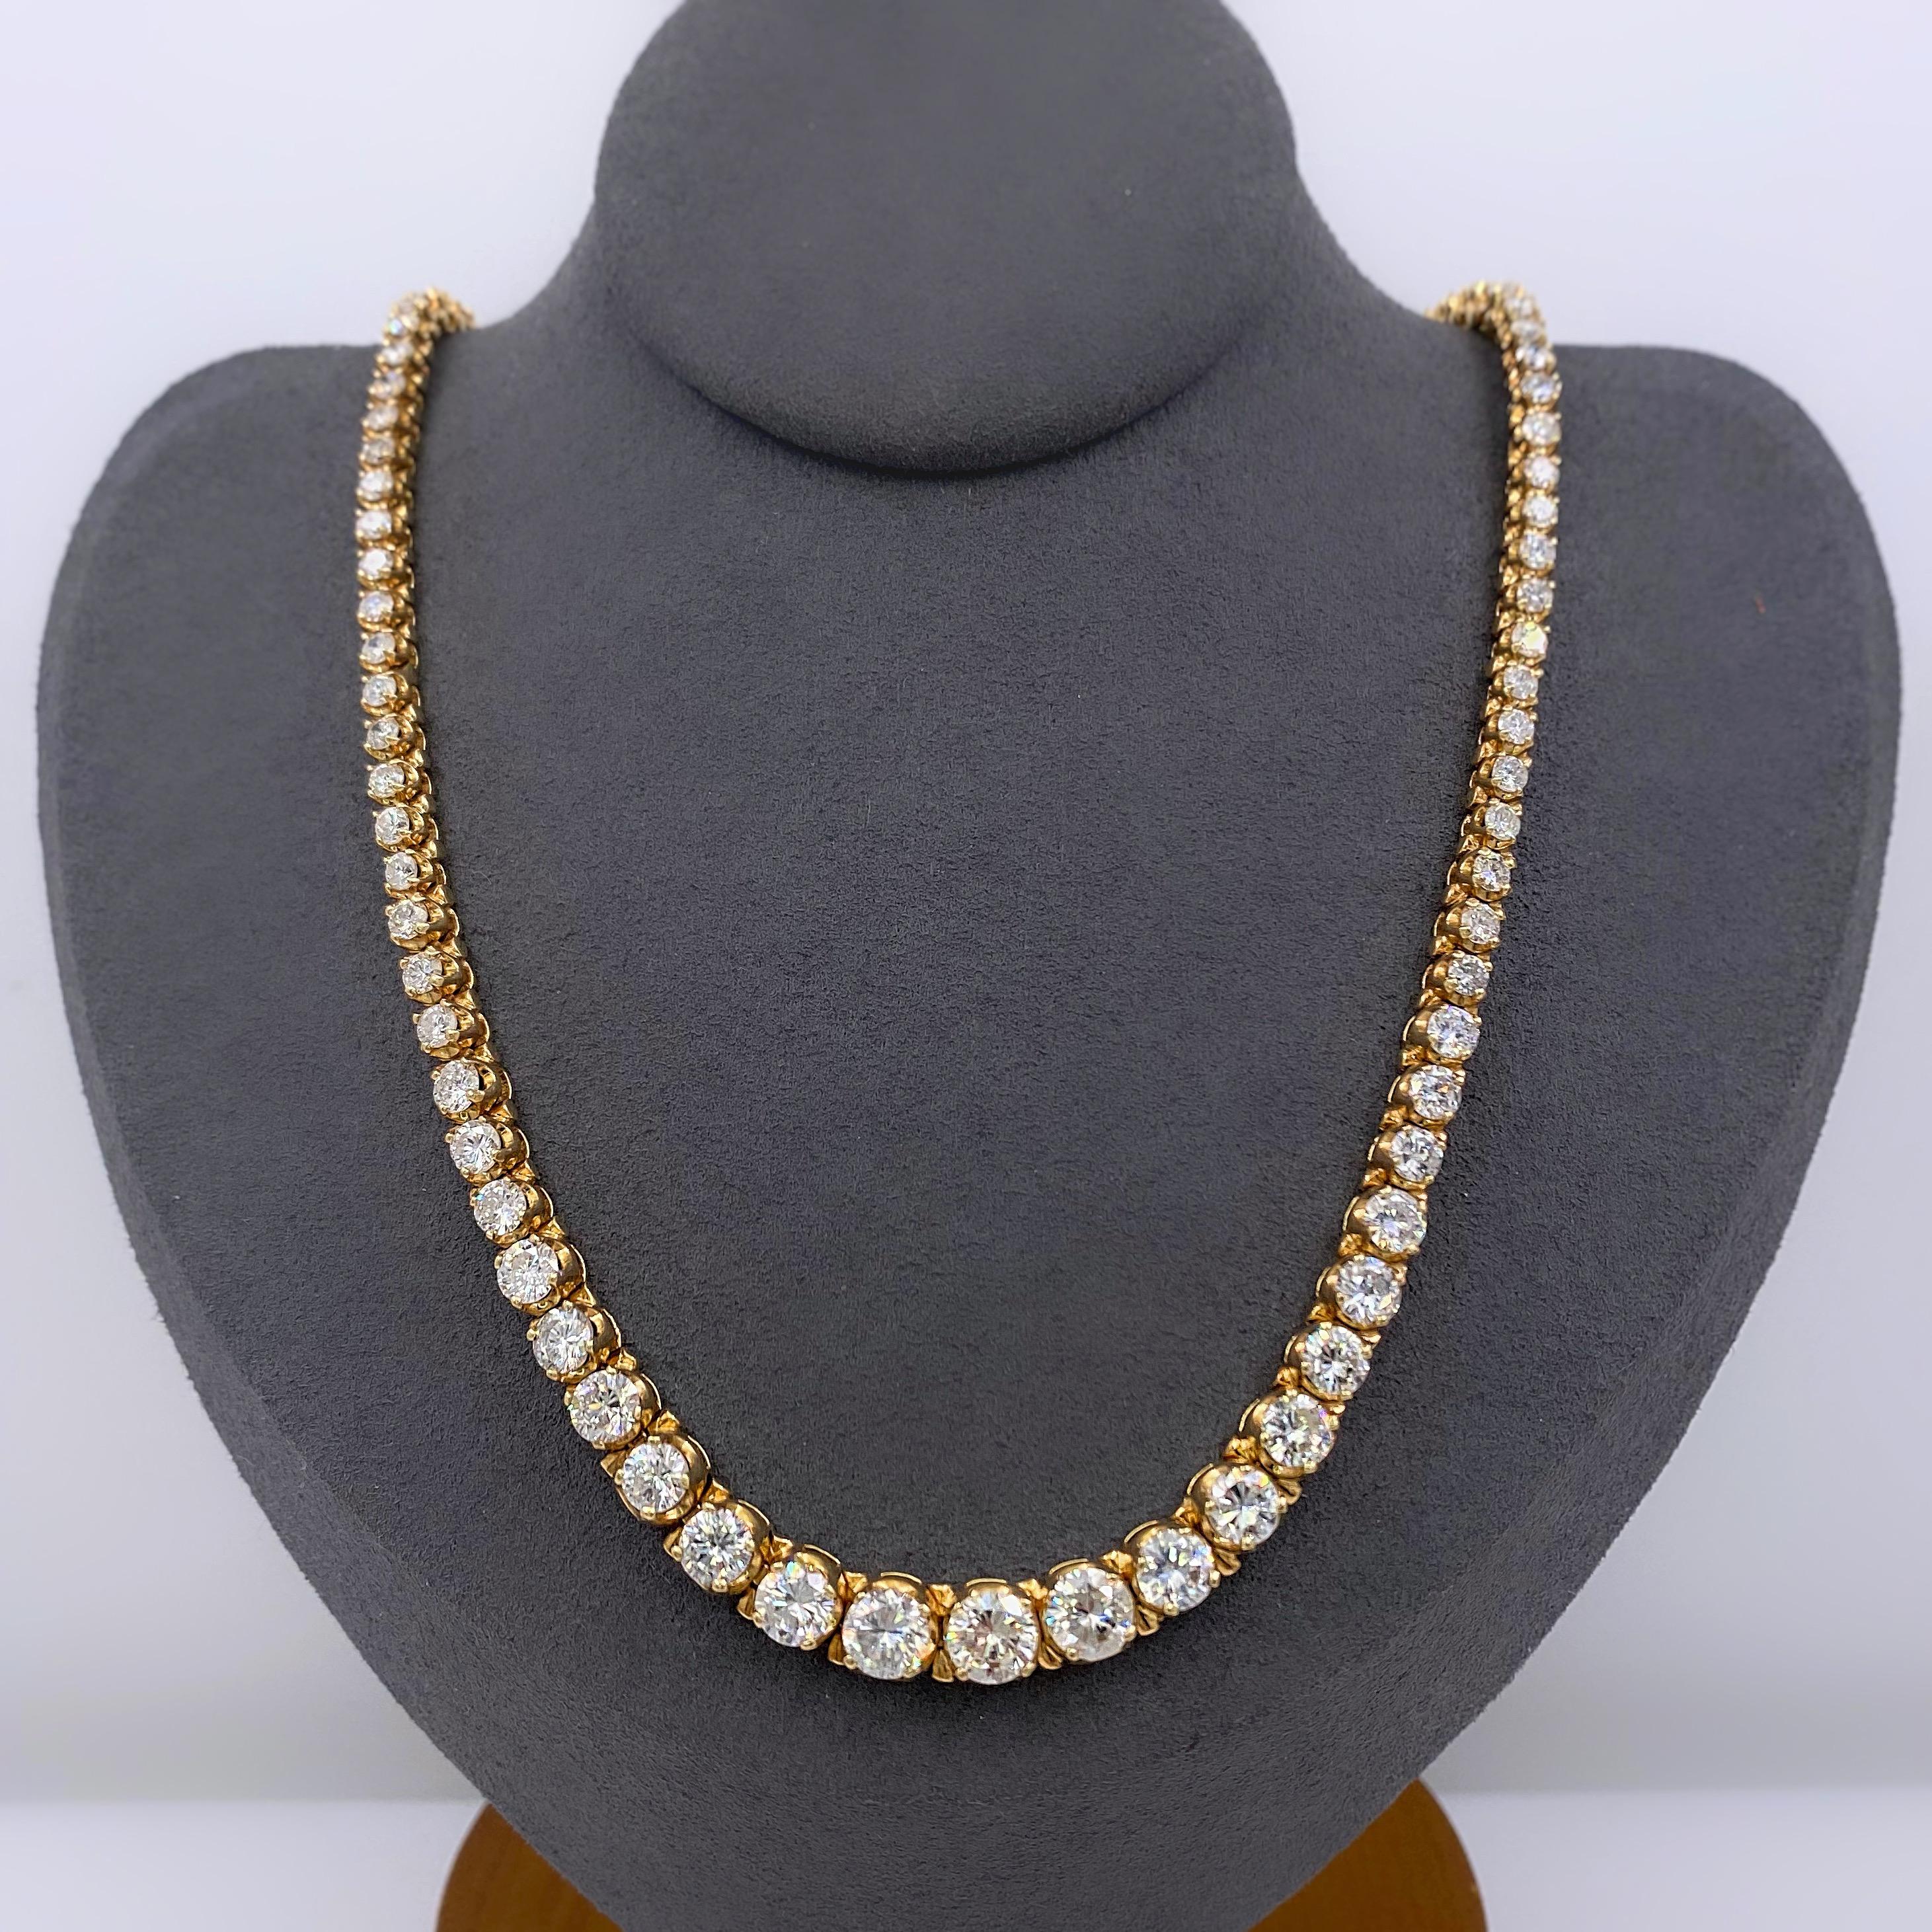 Diamond Riviera Necklace
Metal:  14k Yellow Gold
Length:  16' Inches
TCW:  12.00 tcw
Main Diamond:  101 Round Brilliant Diamonds 12.00 tcw
Color & Clarity:  H - I, SI2 - I1
Measurements:  Narrowest 3.55 MM to Widest 5.90 MM
Hallmark:  14K
Includes: 